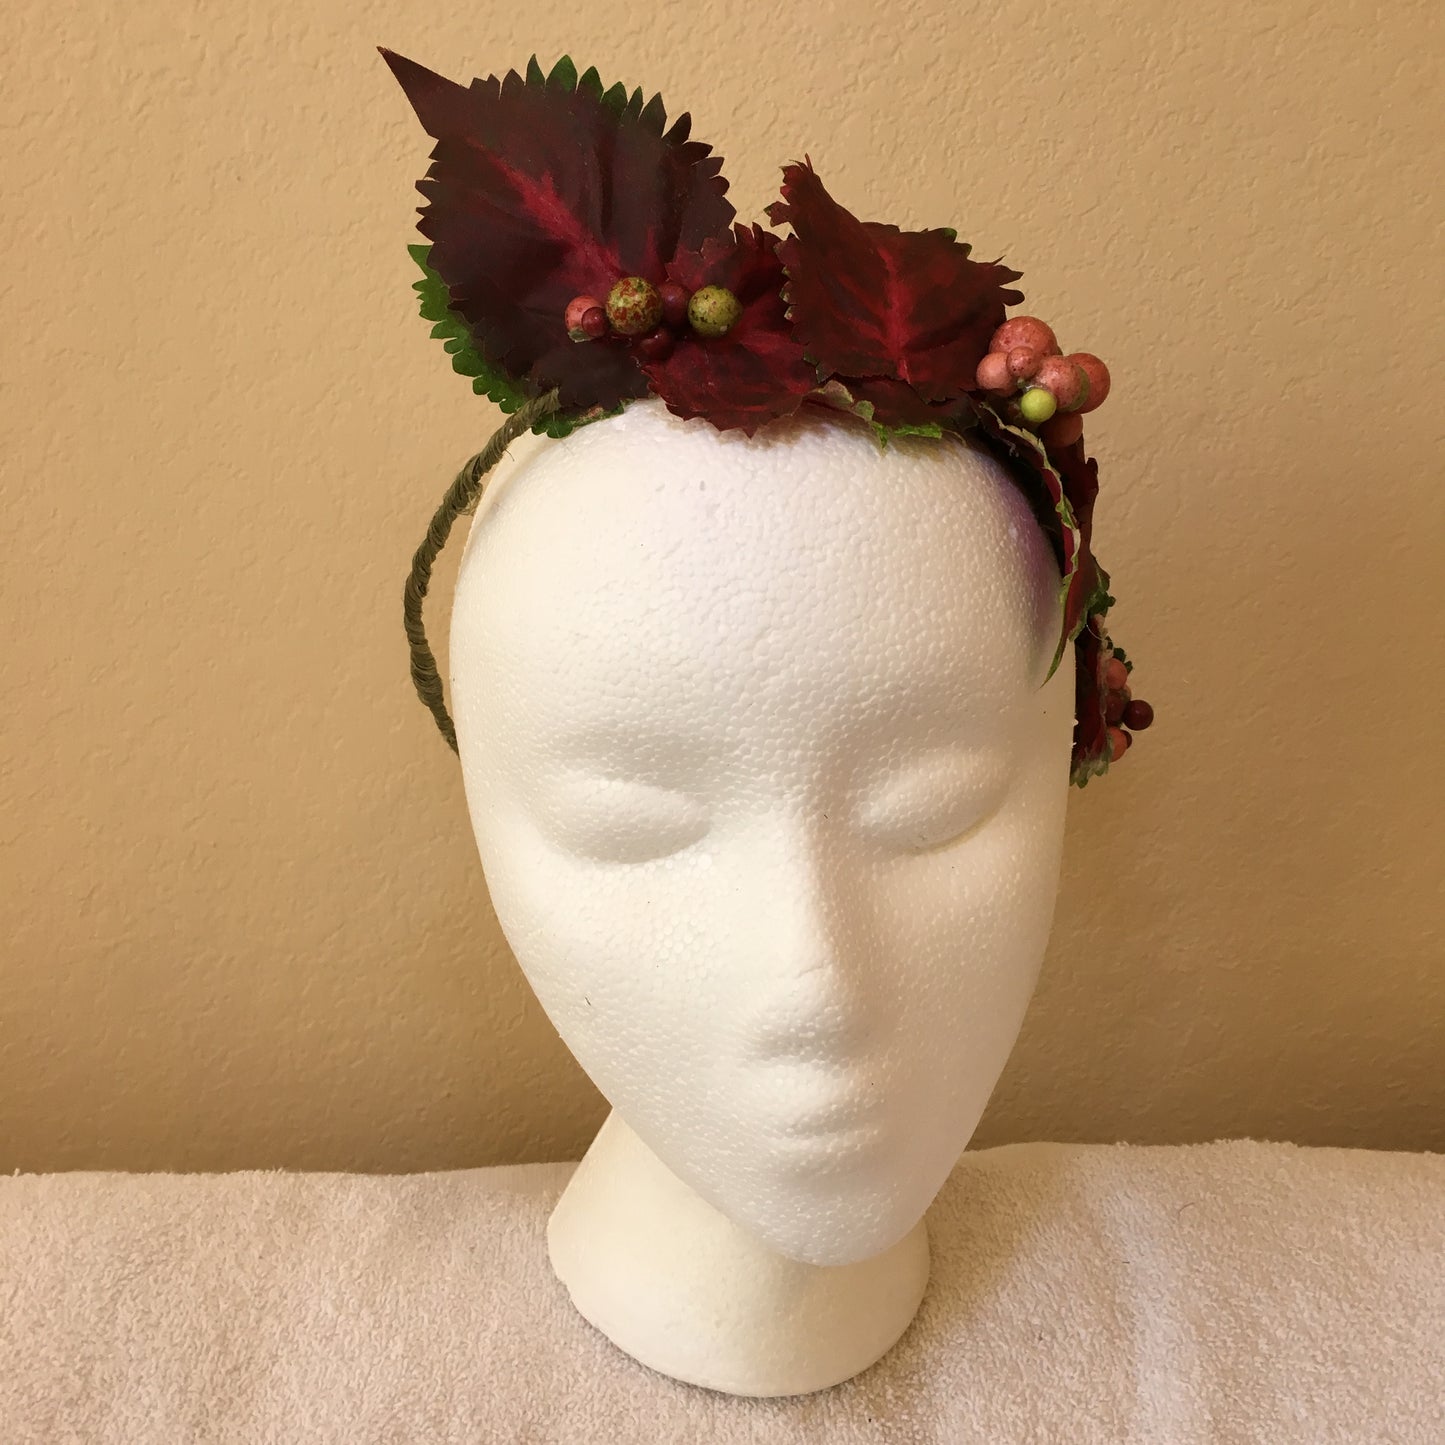 Side Wreath - Green & burgundy pointy leaves w/ pink a&green ball accents